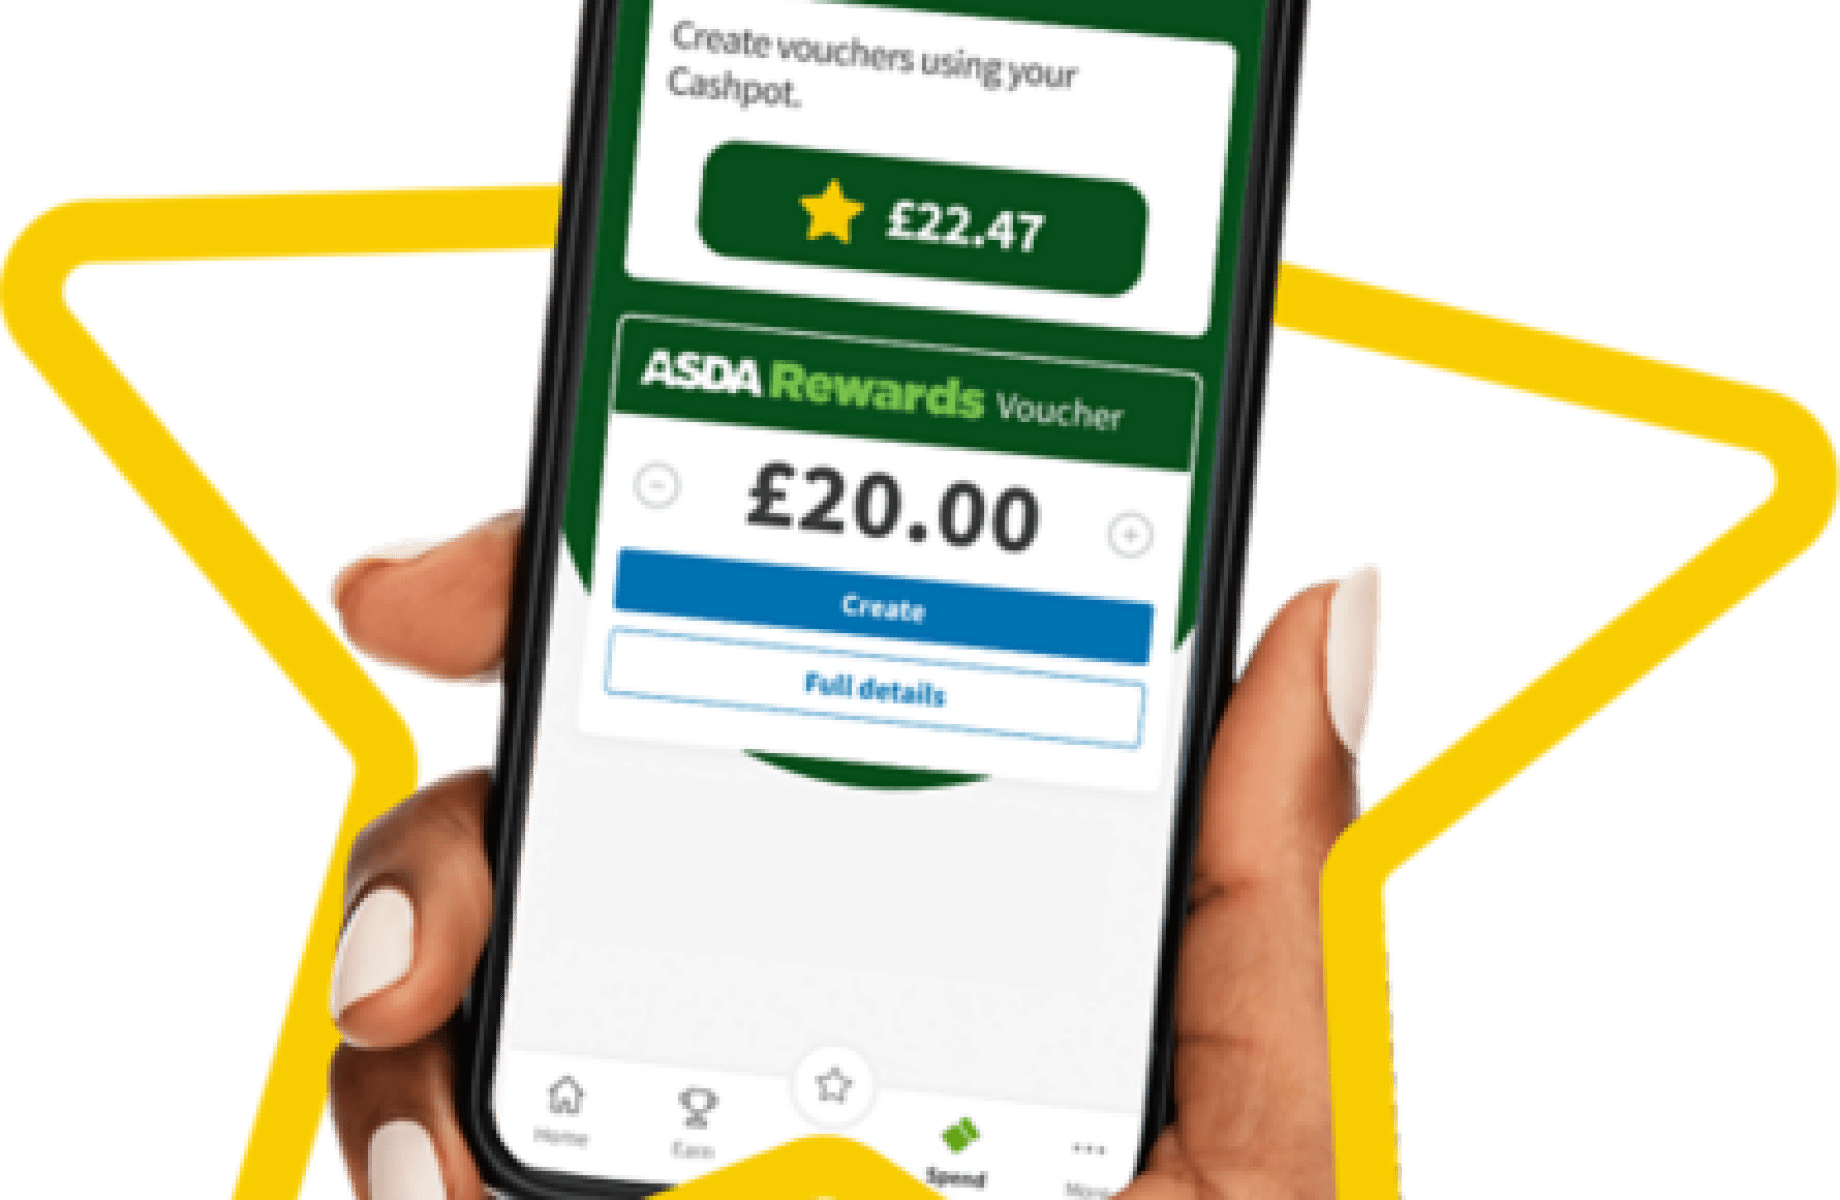 Customers now have more time to use their Cashpots thanks to a new feature that Asda has added to its loyalty programme, Asda Rewards.